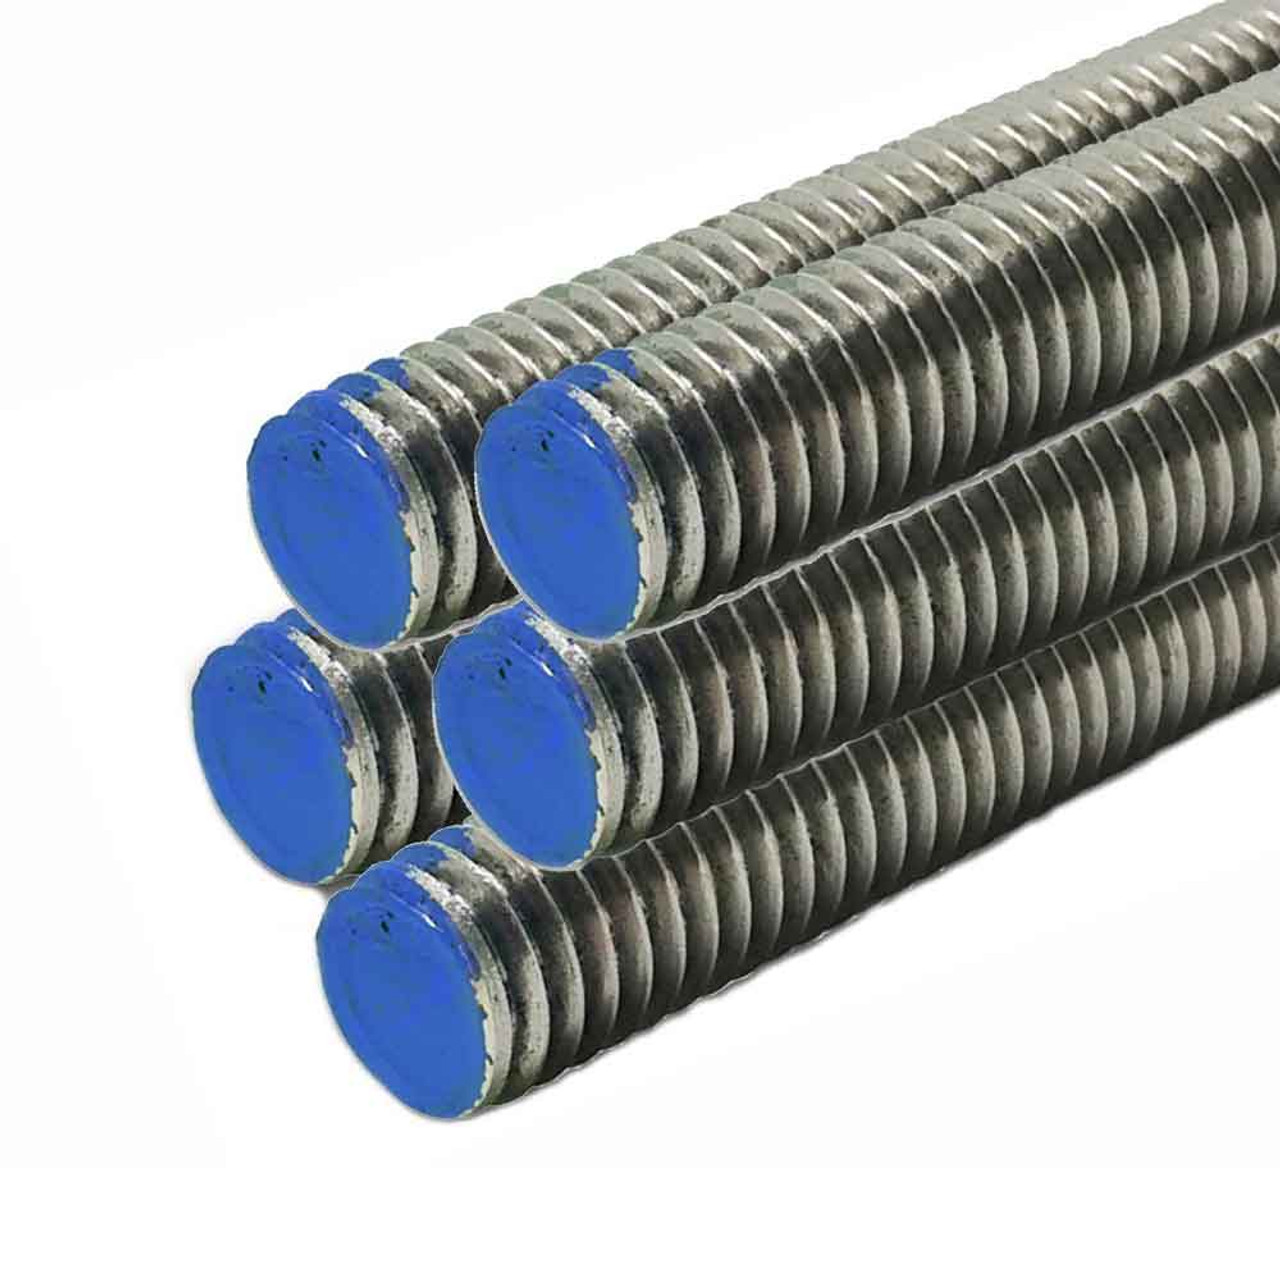 1 inch - 8 TPI, Length: 36 inches (5 Pack), Stainless Steel Fully Threaded Rod